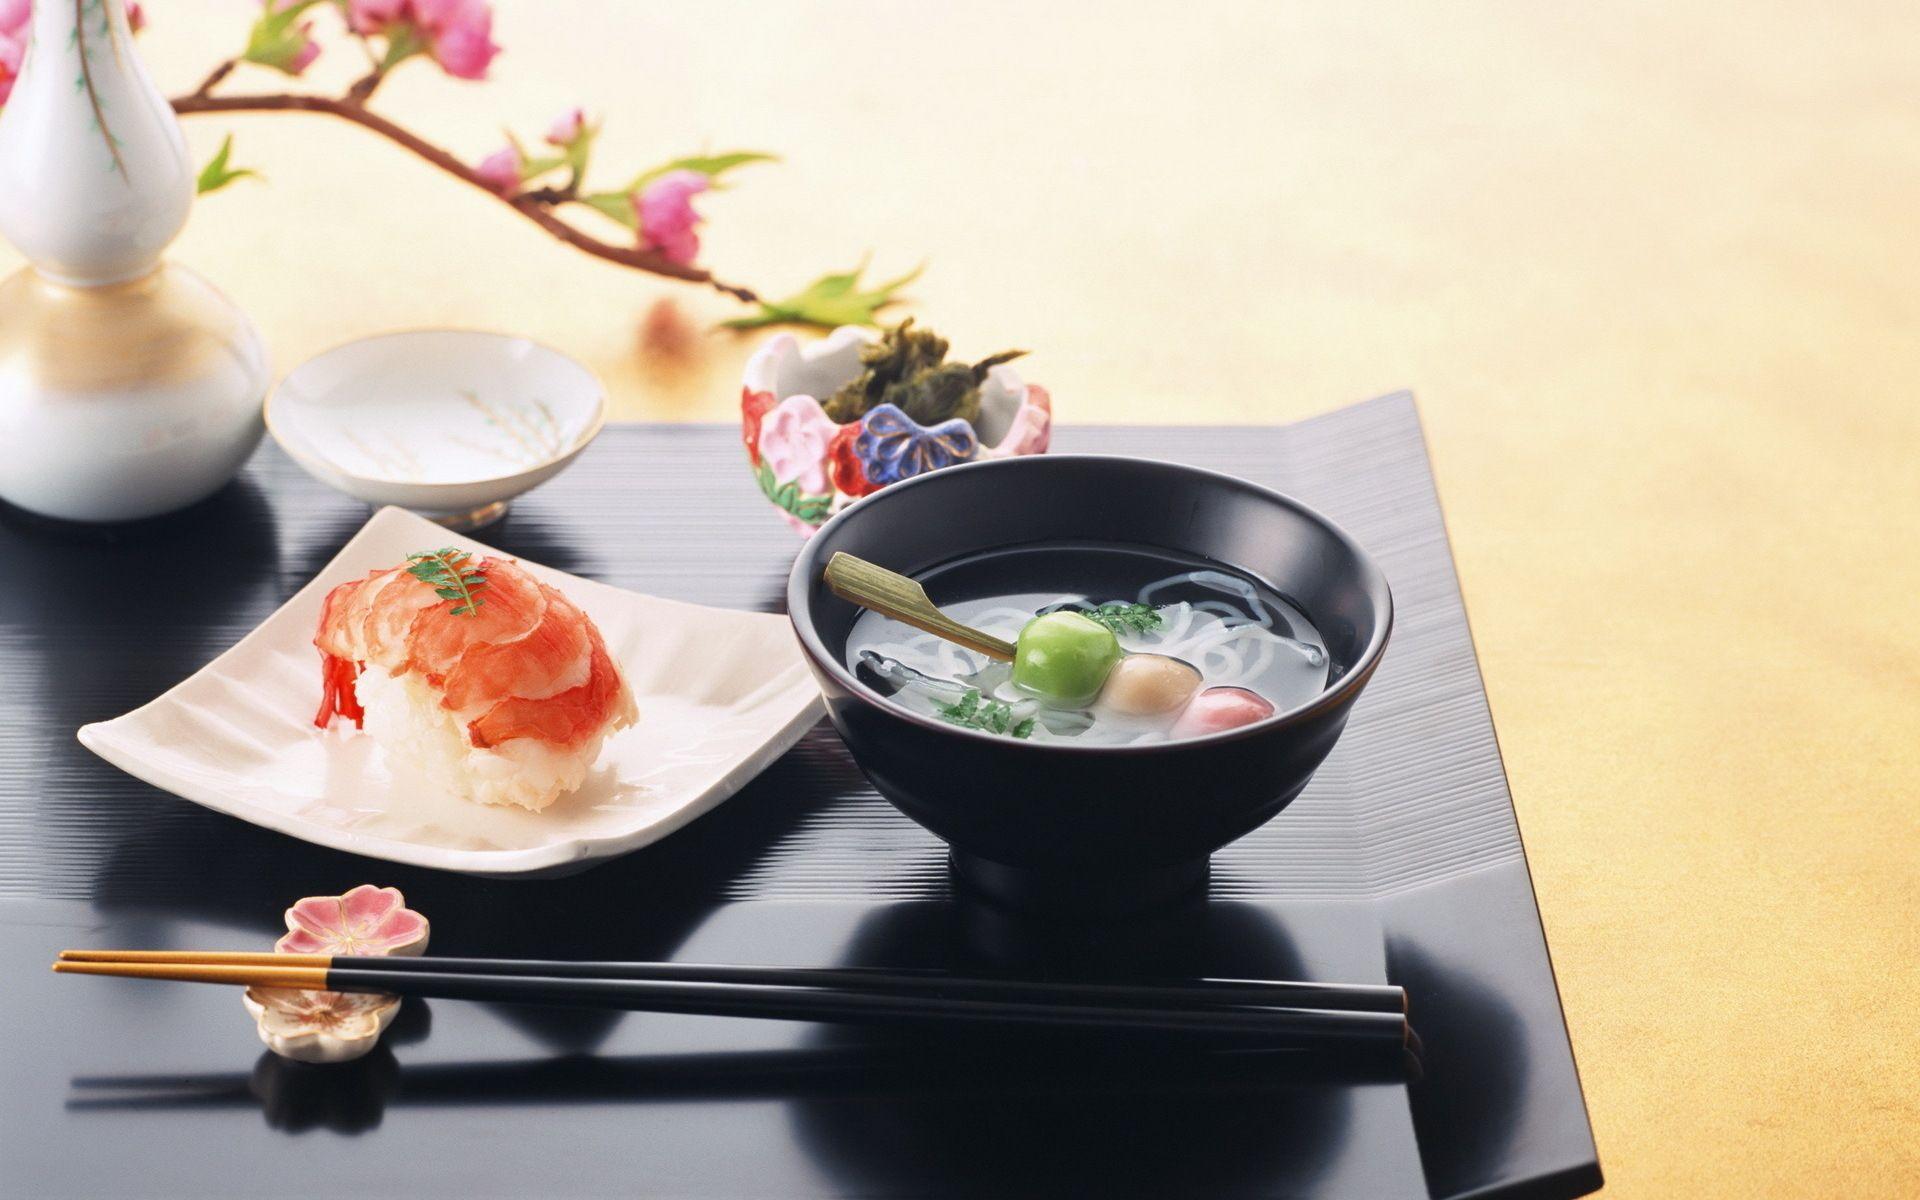 Japanese Cuisine wallpaper and image, picture, photo